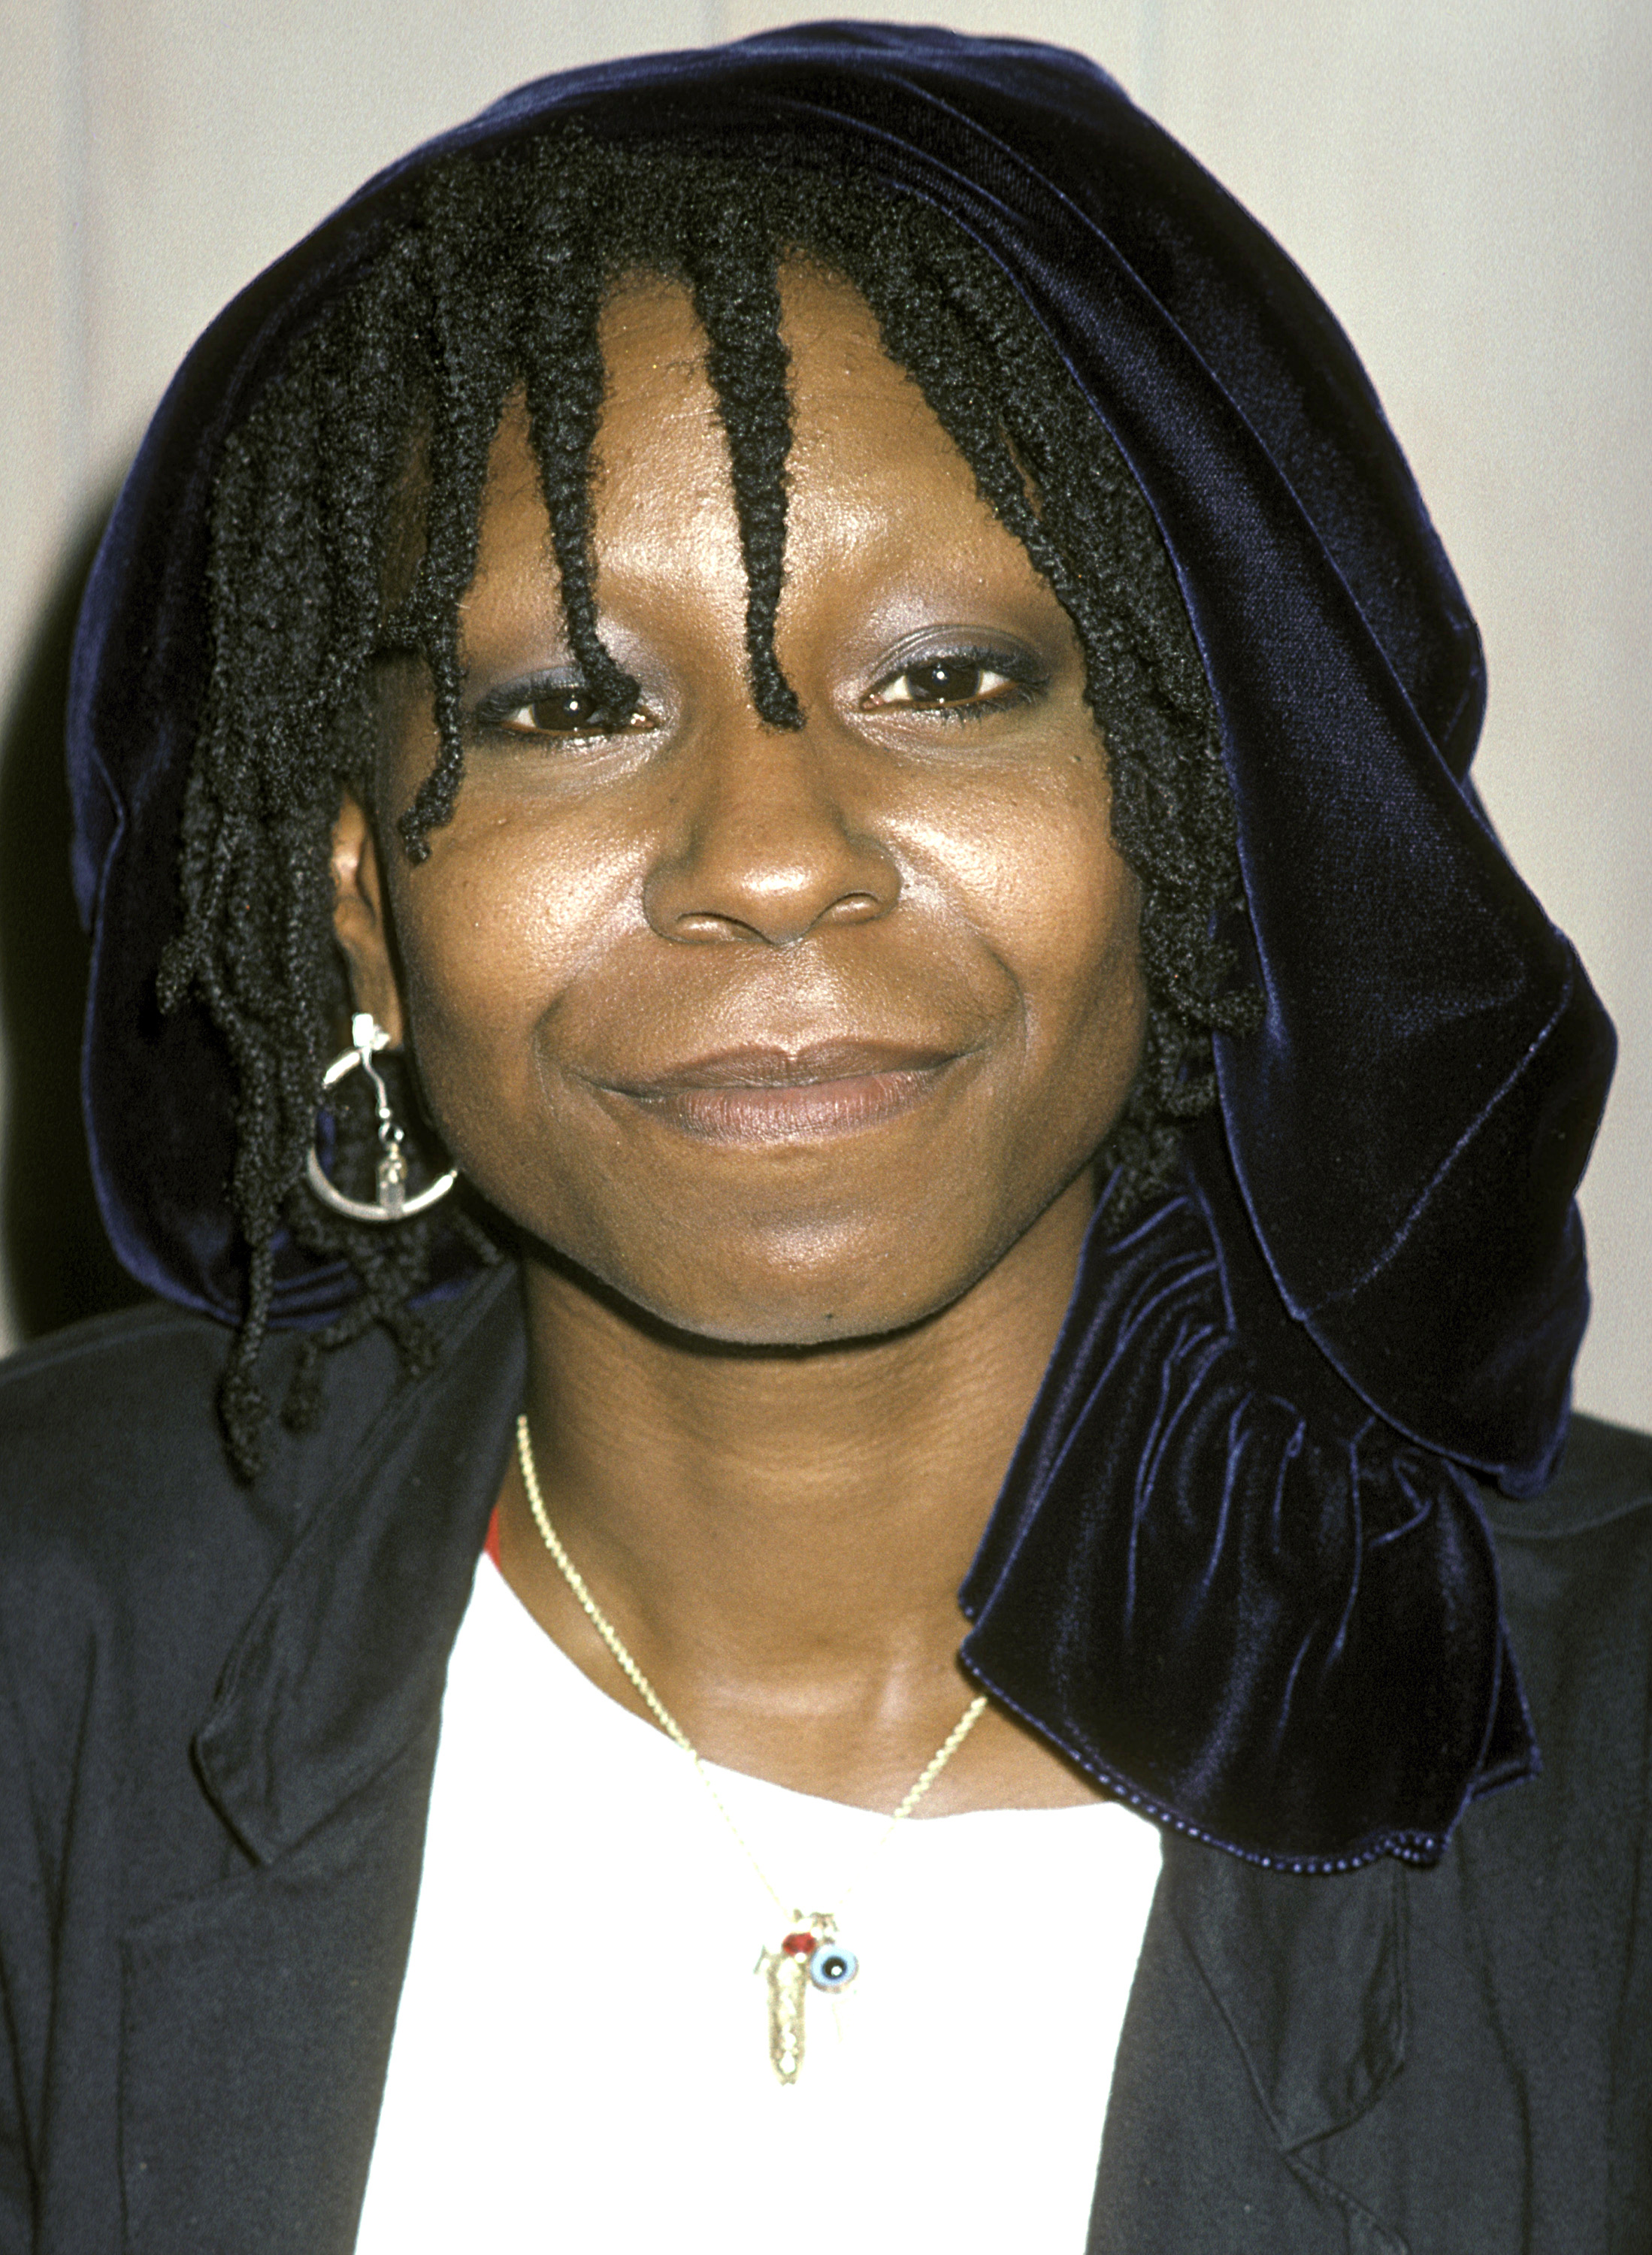 Whoopi Goldberg bei "Welcome Home Vets" im The Forum am 24. Februar 1986 in Los Angeles, Kalifornien. | Quelle: Getty Images